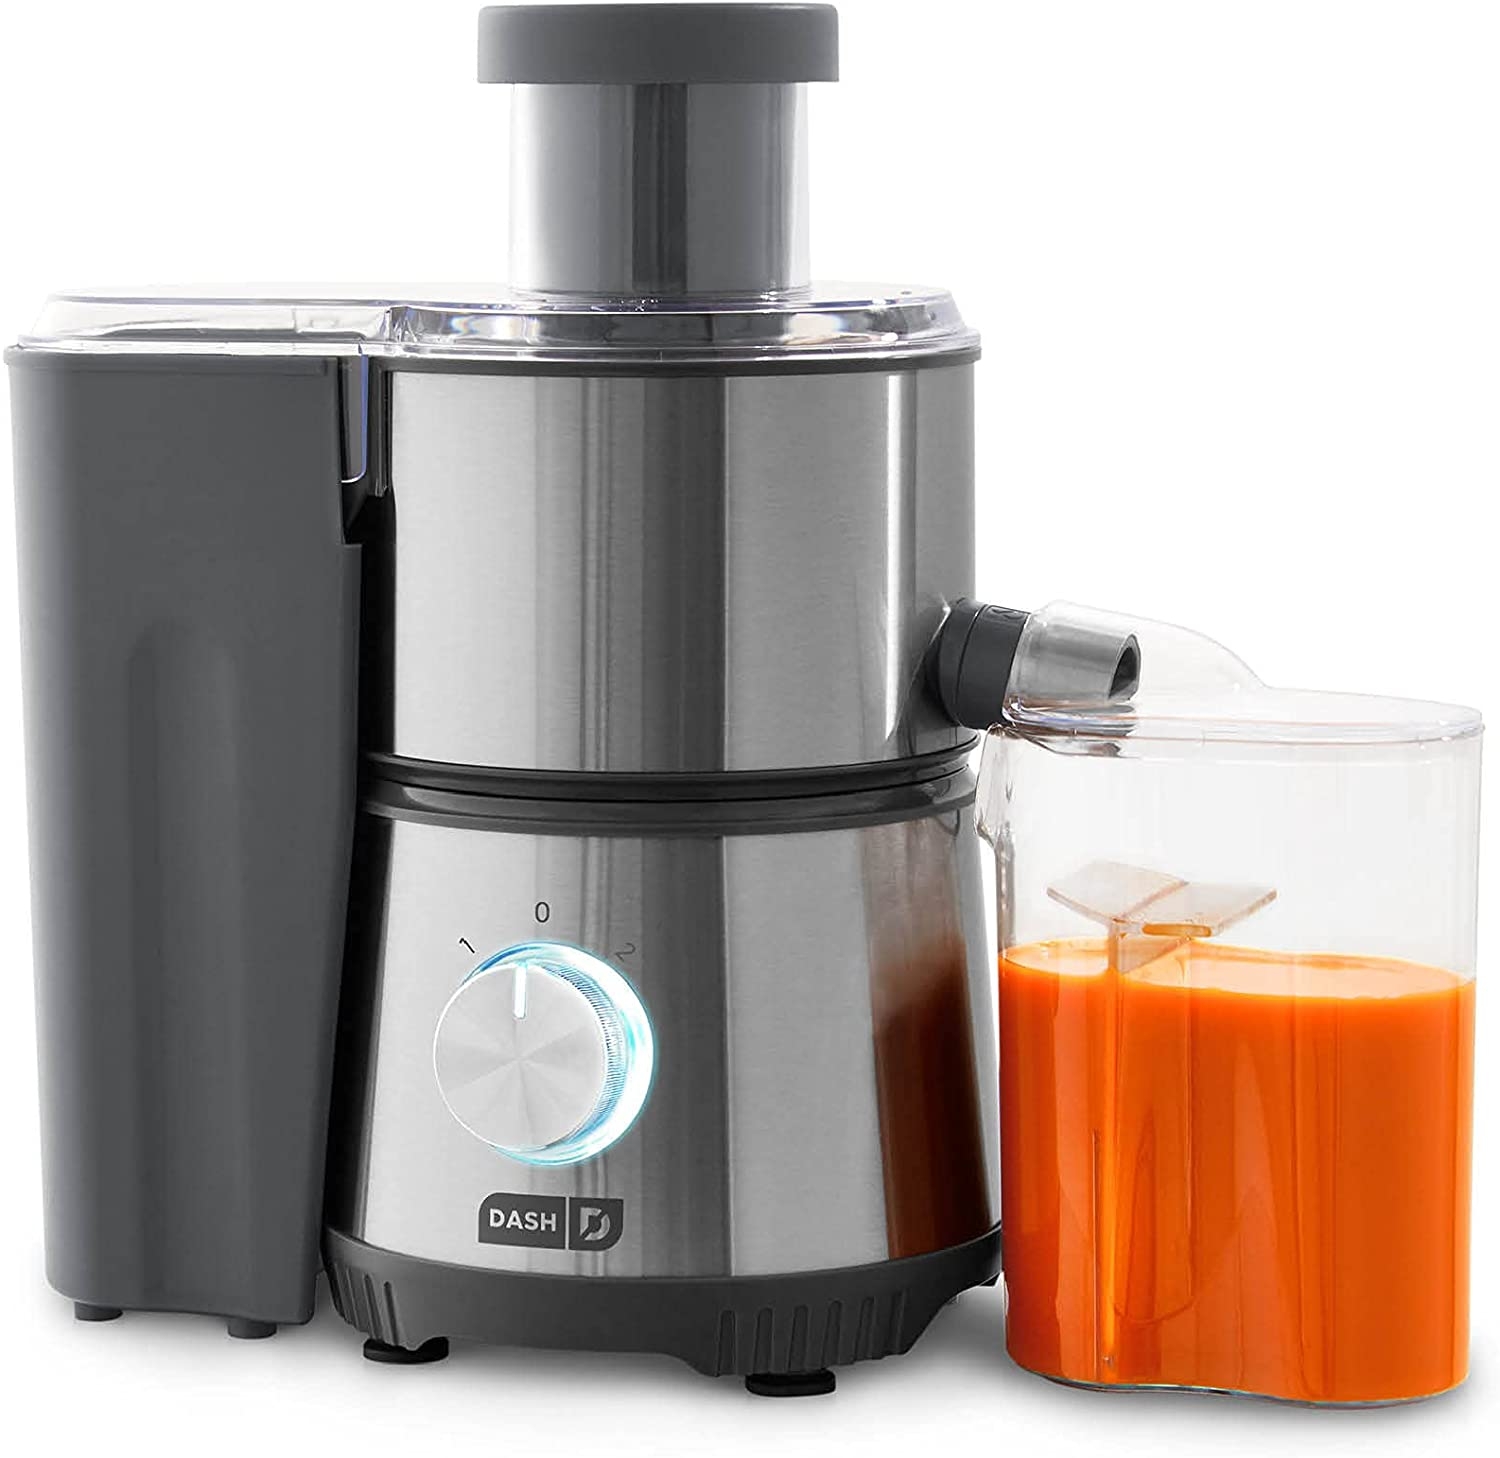 Dash Compact Centrifugal Juicer, Press Juicing Machine, 2-Speed, 2″ Wide Feed Chute for Whole Fruit Vegetable, Anti-drip,